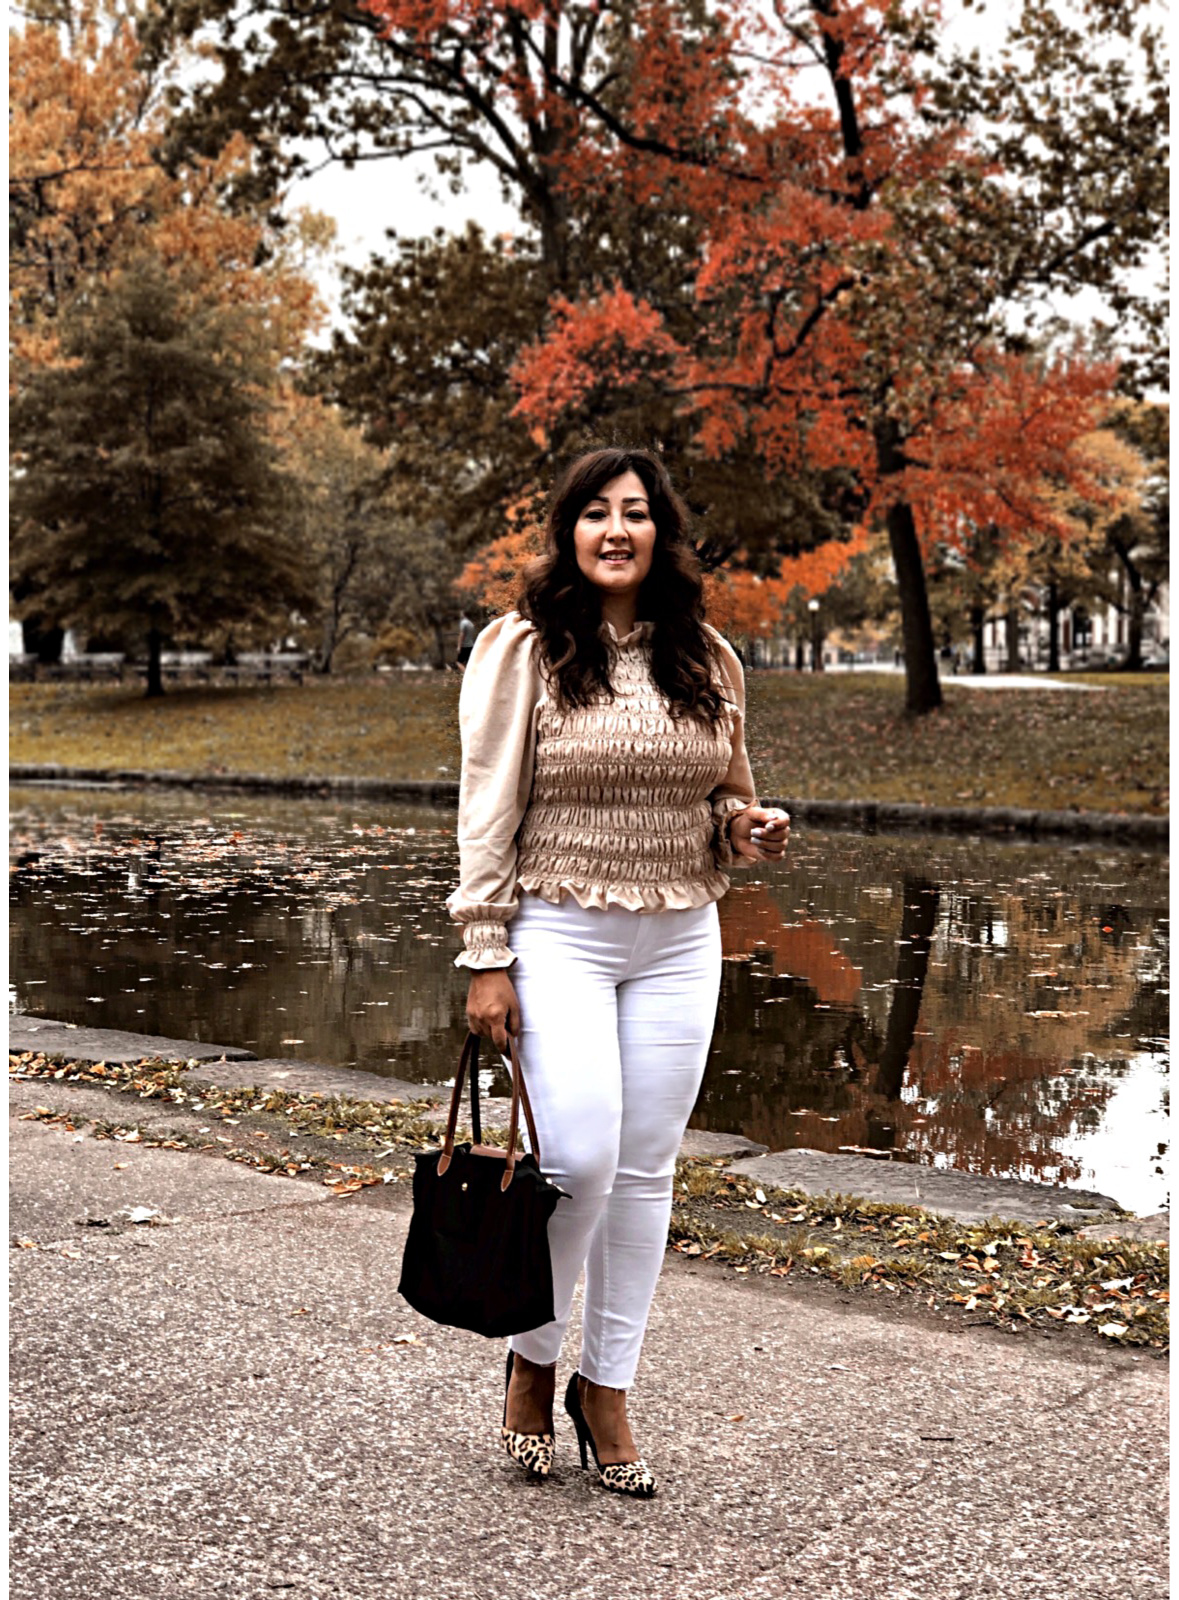 Fall Fashion Perfect For Texas Weather - Society19